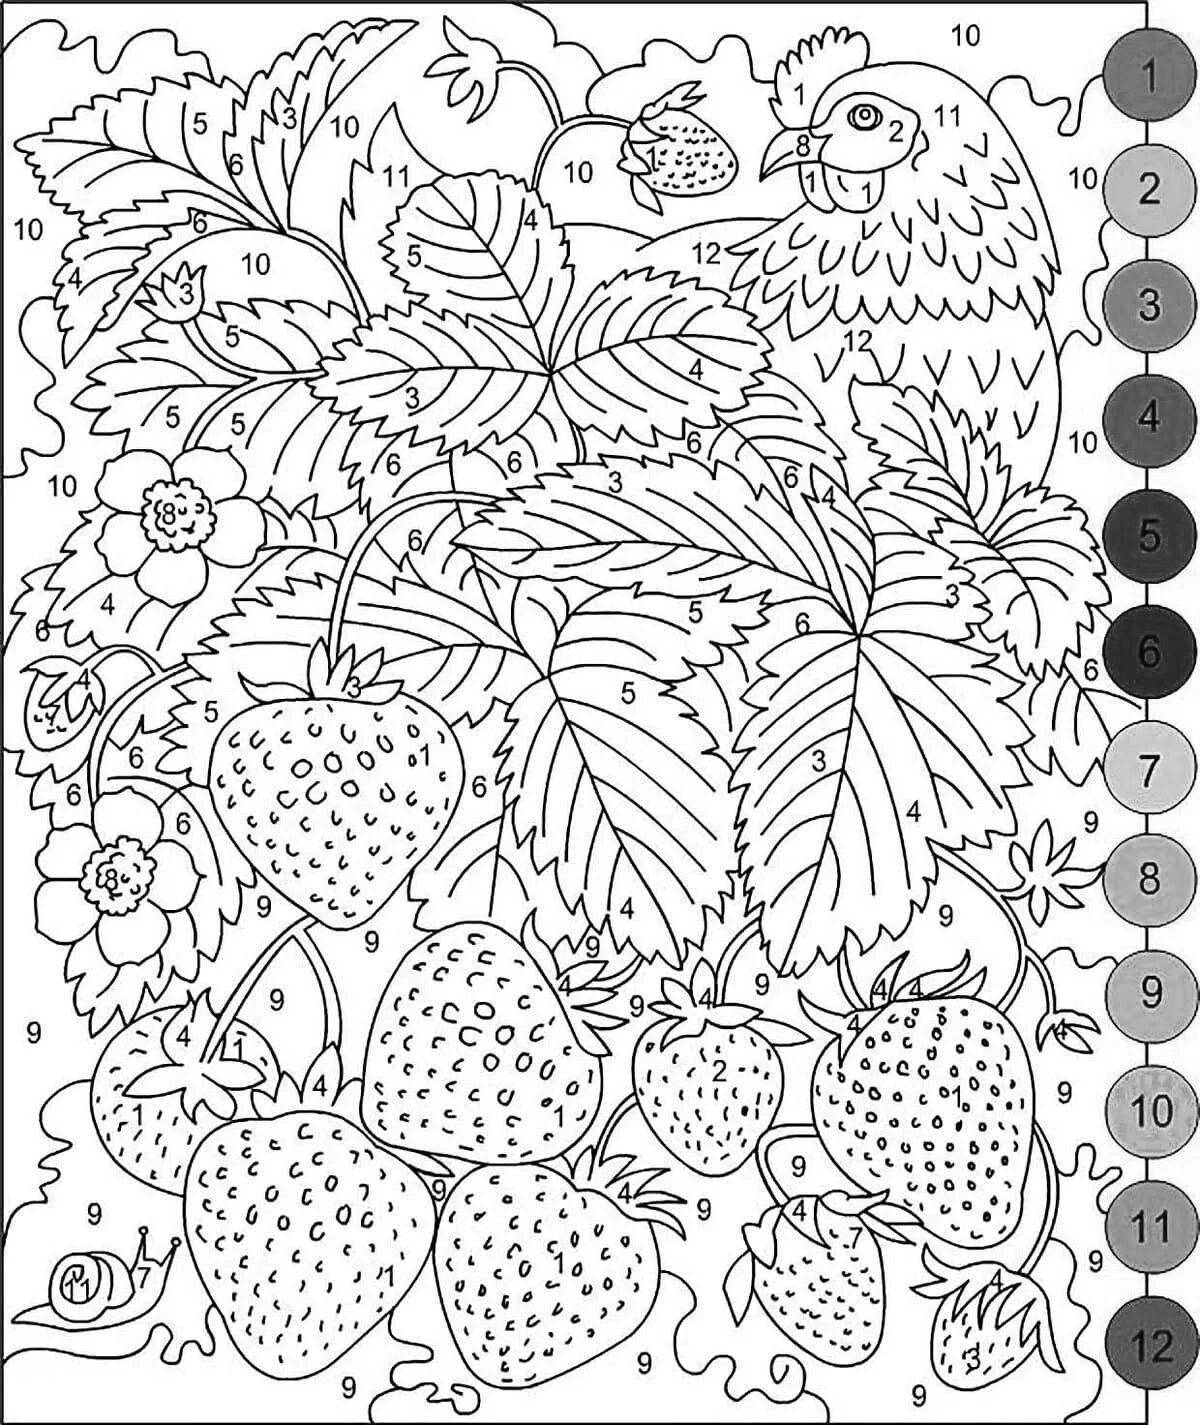 Fun coloring by numbers for everyone